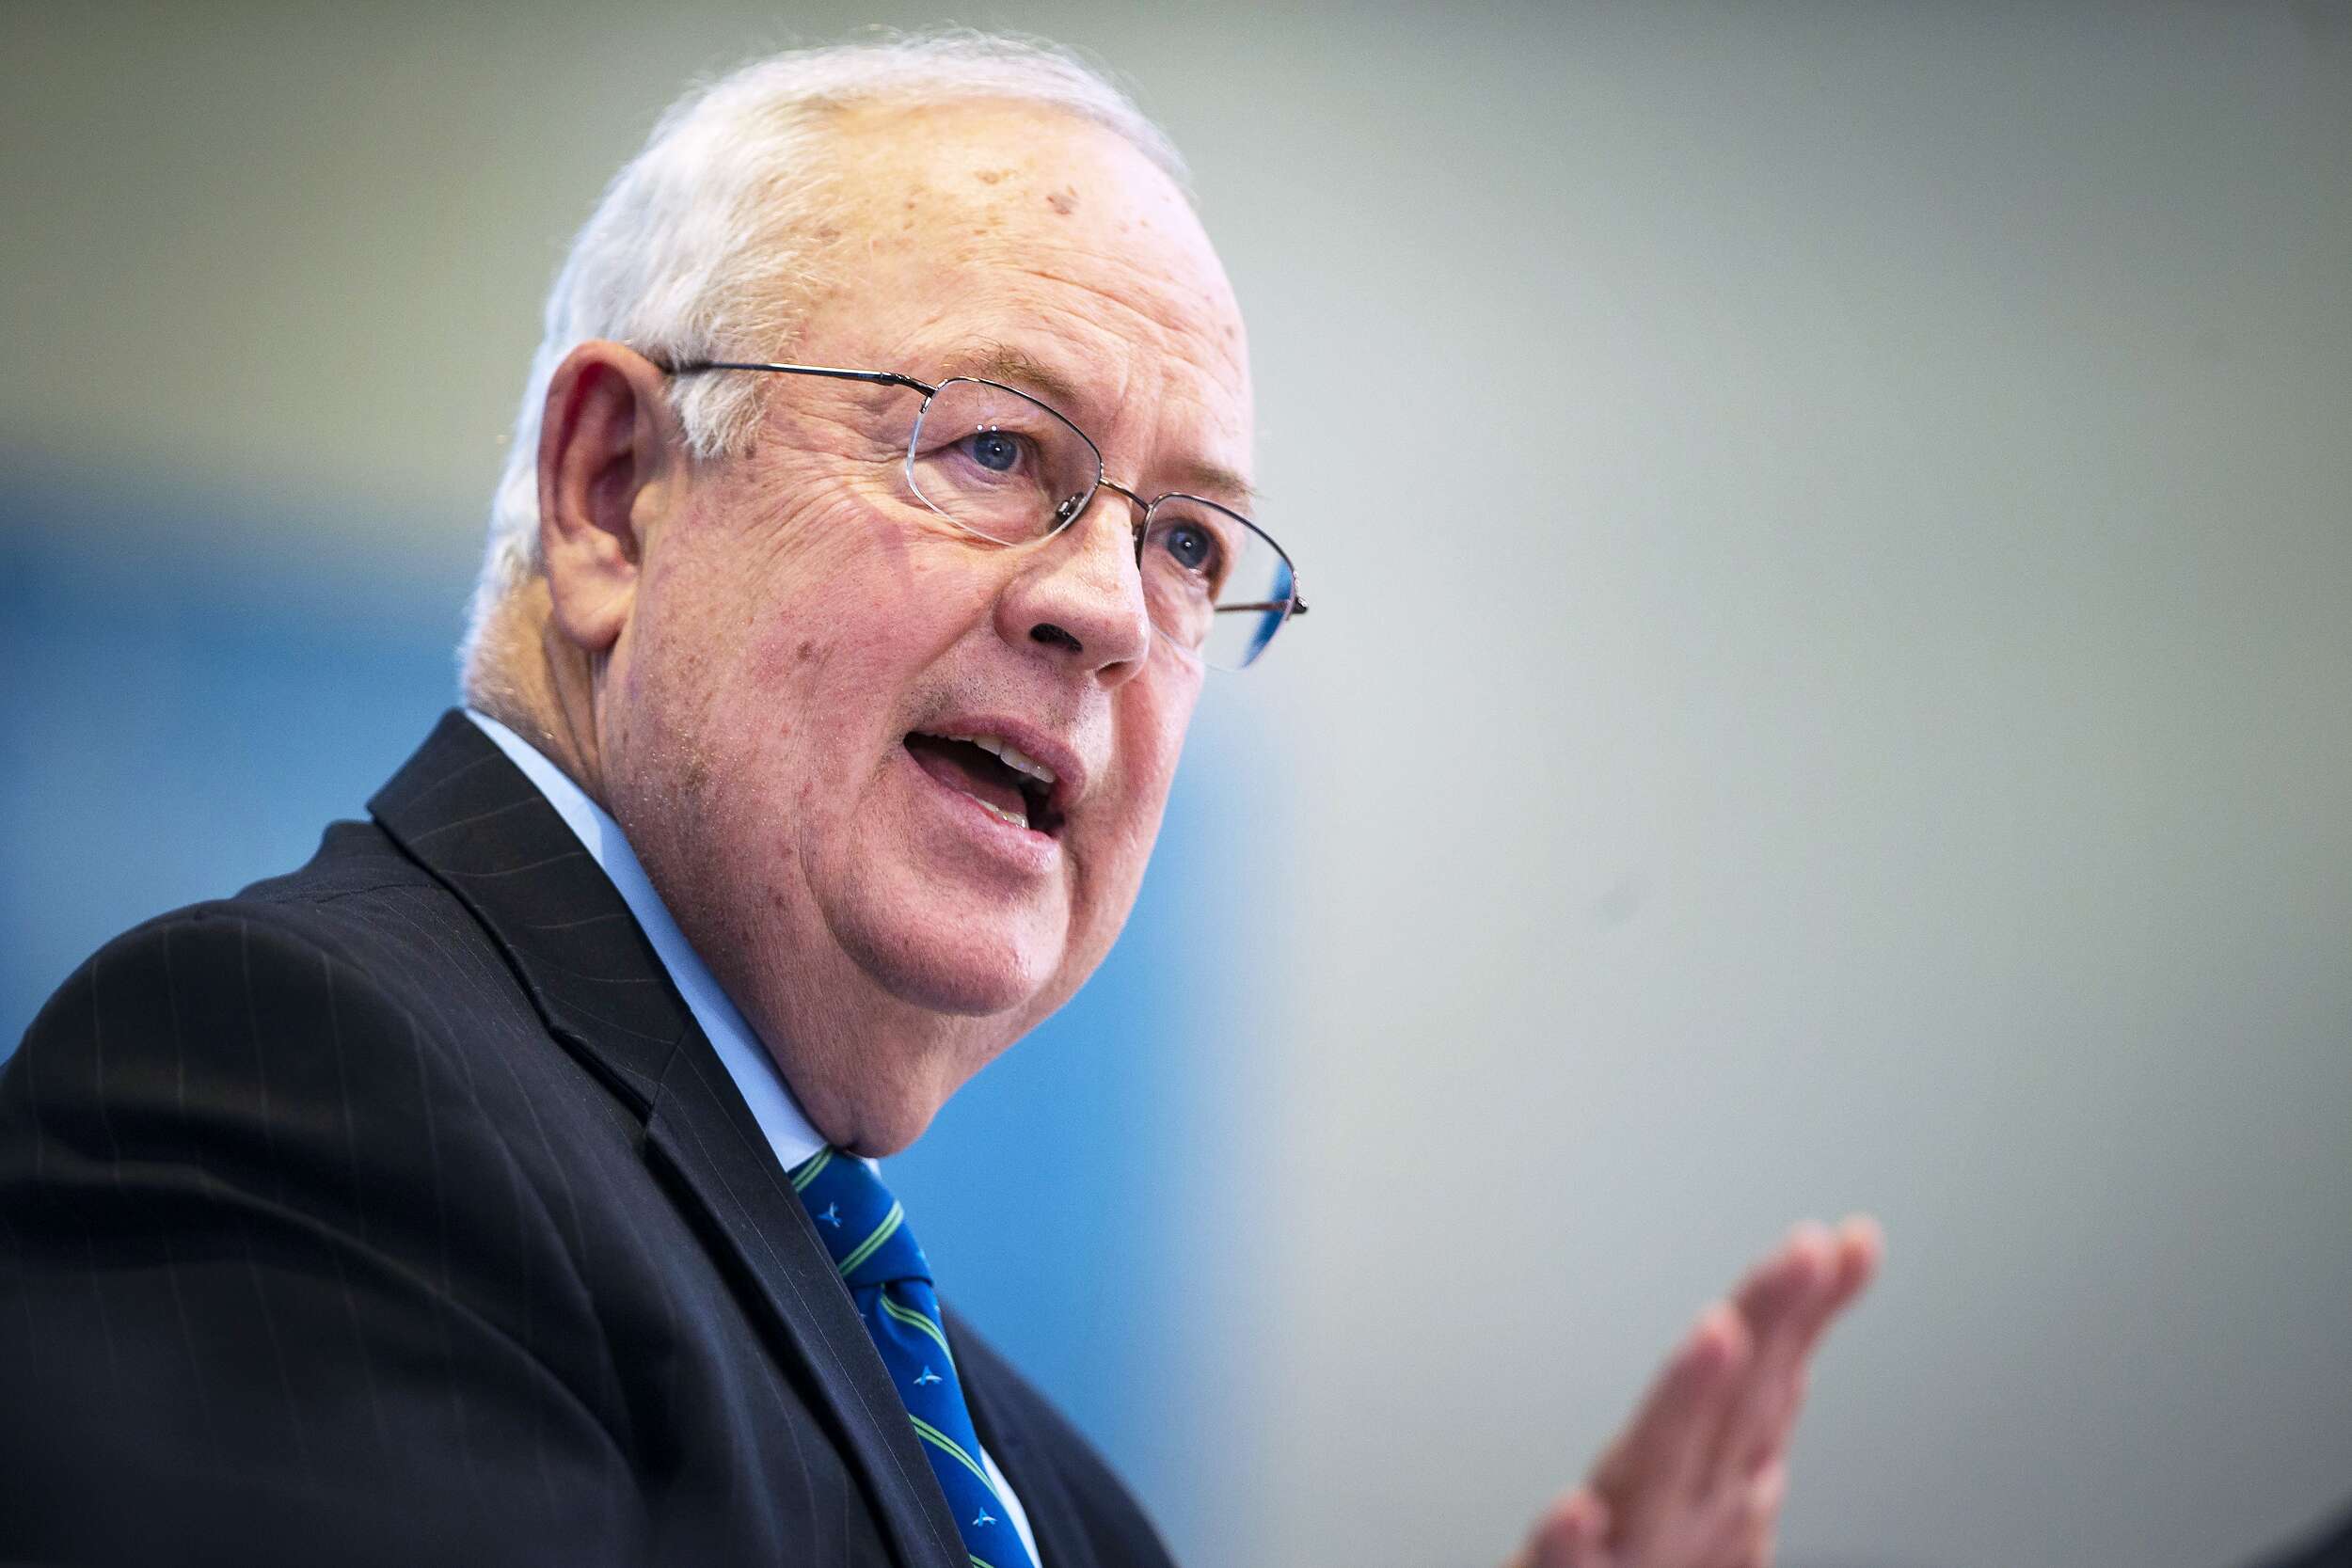 Ken Starr, former independent counsel who investigated former U.S. President Bill Clinton, speaks during an American Enterprise Institute event in Washington, D.C. on Sept. 18, 2018.Al Drago / Bloomberg via Getty Images